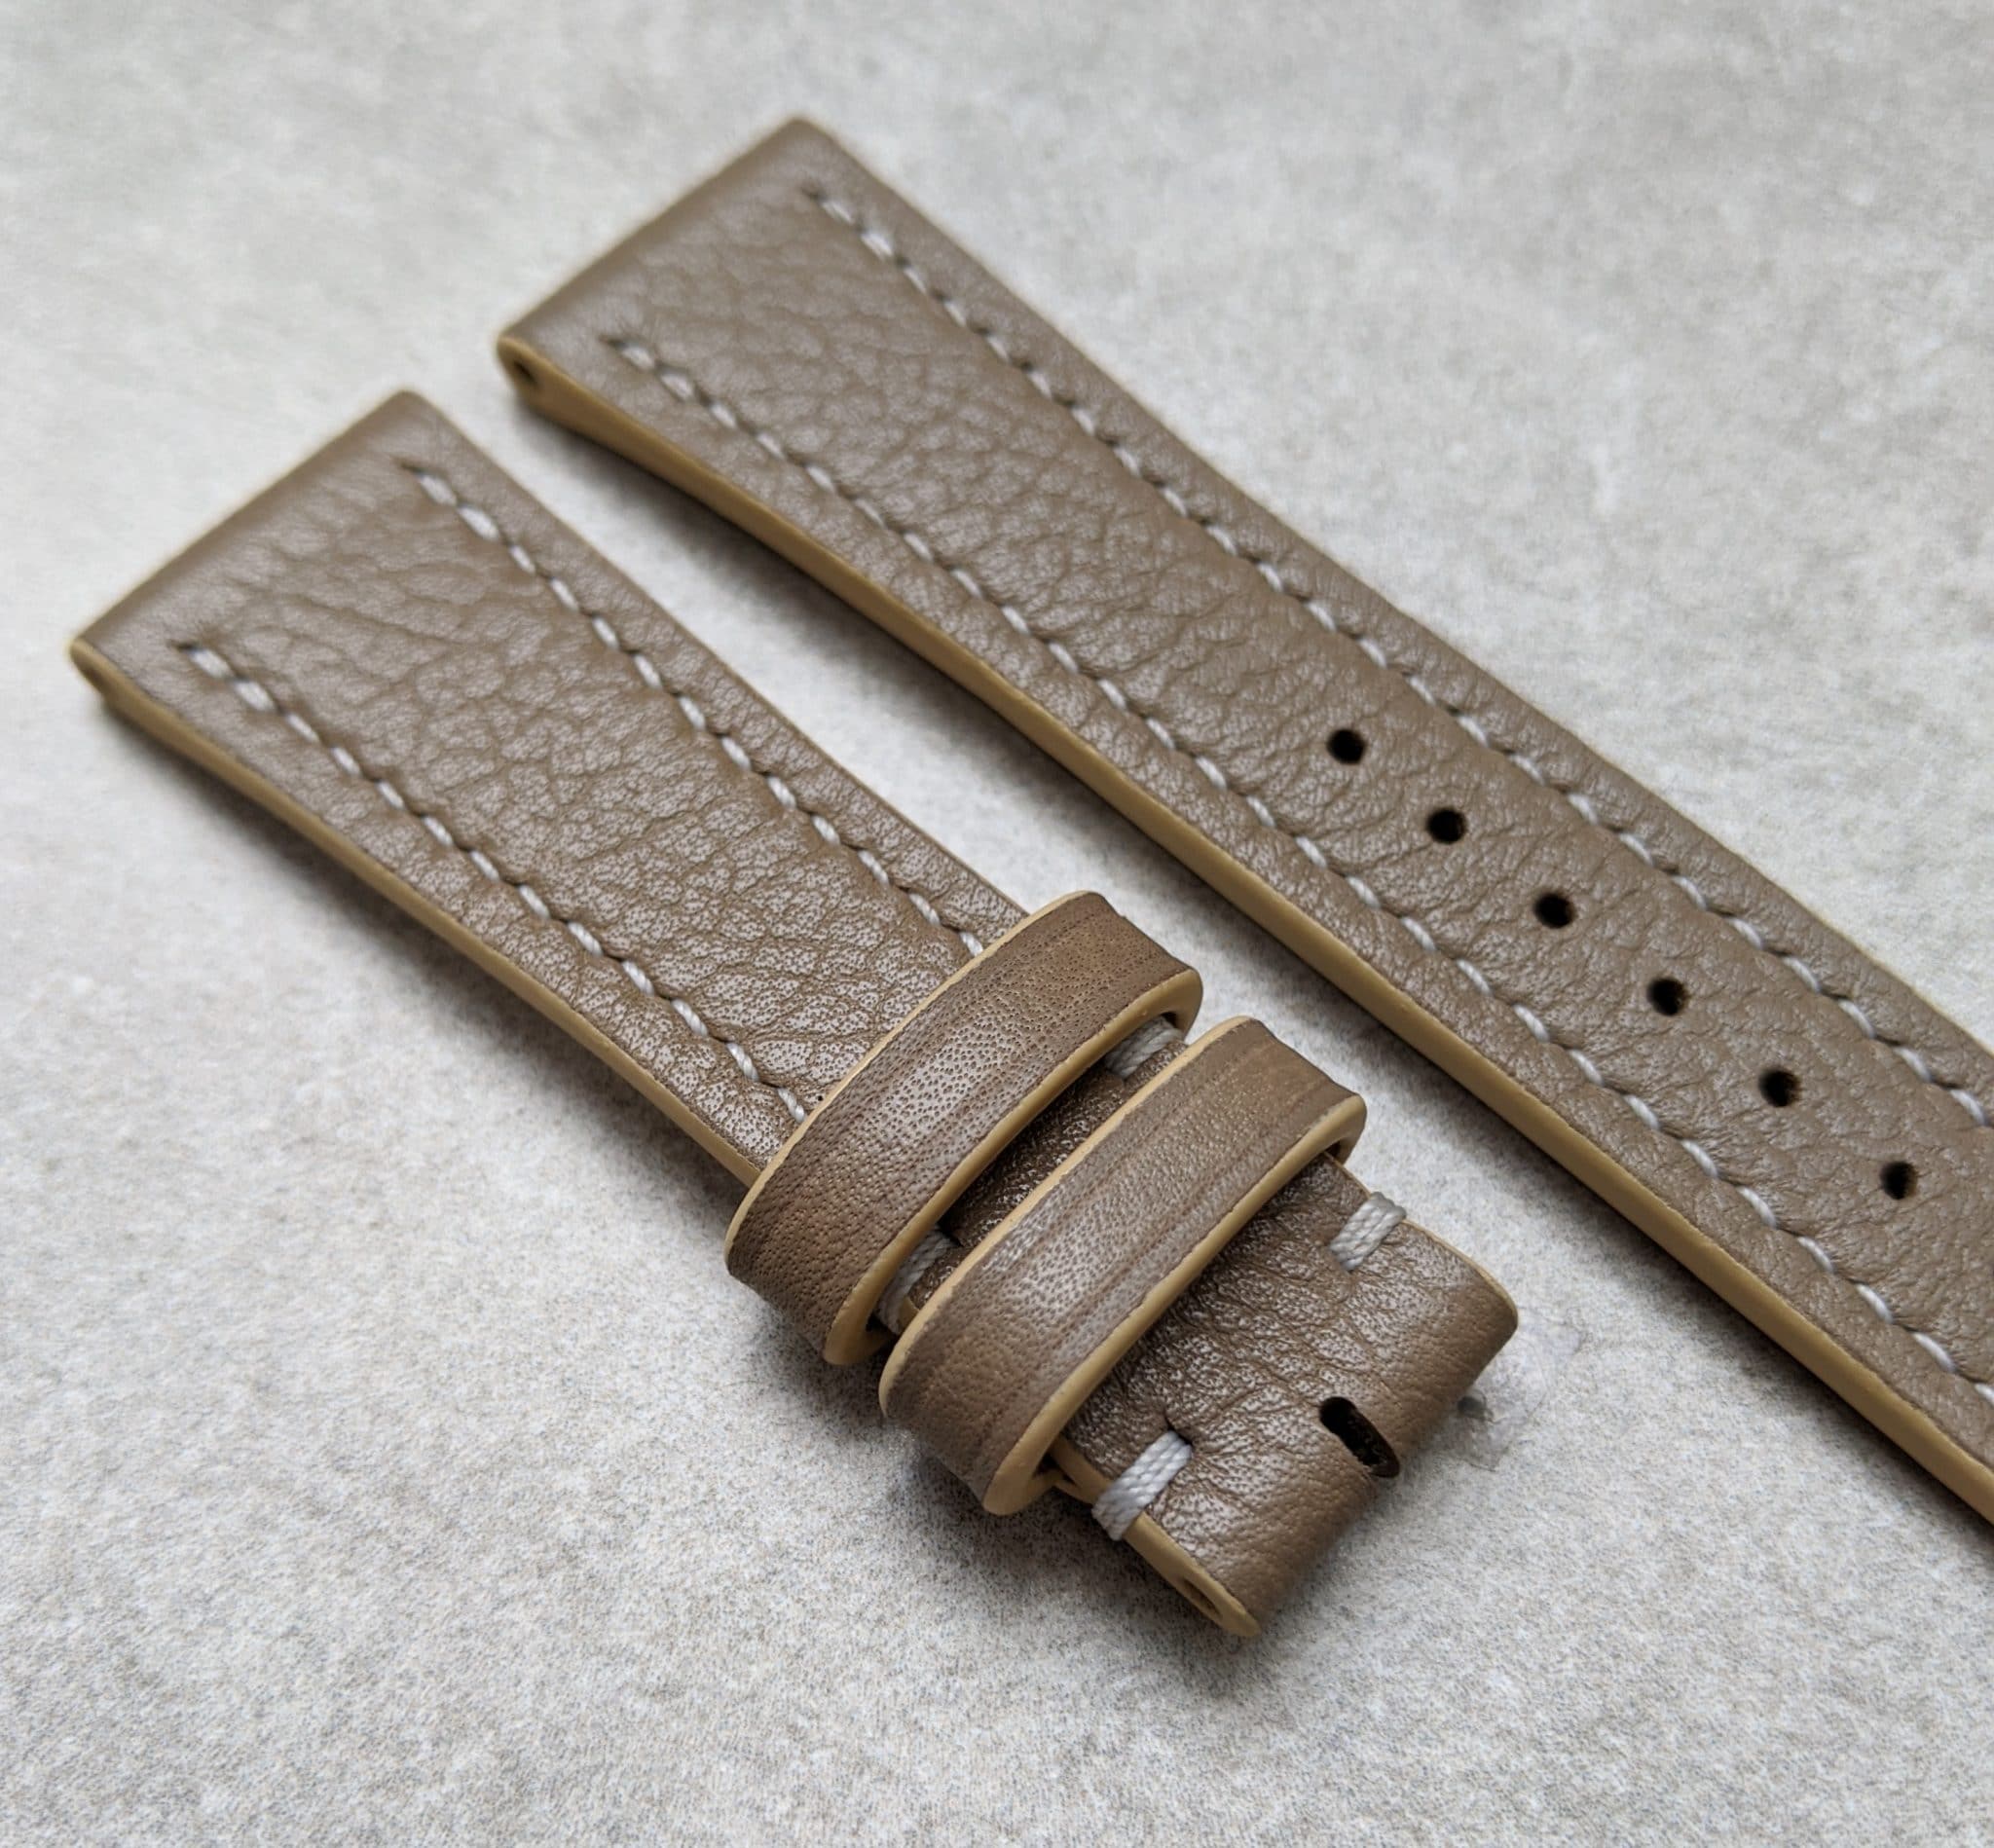 Grained Impala Calfskin Strap - Taupe - The Strap Tailor